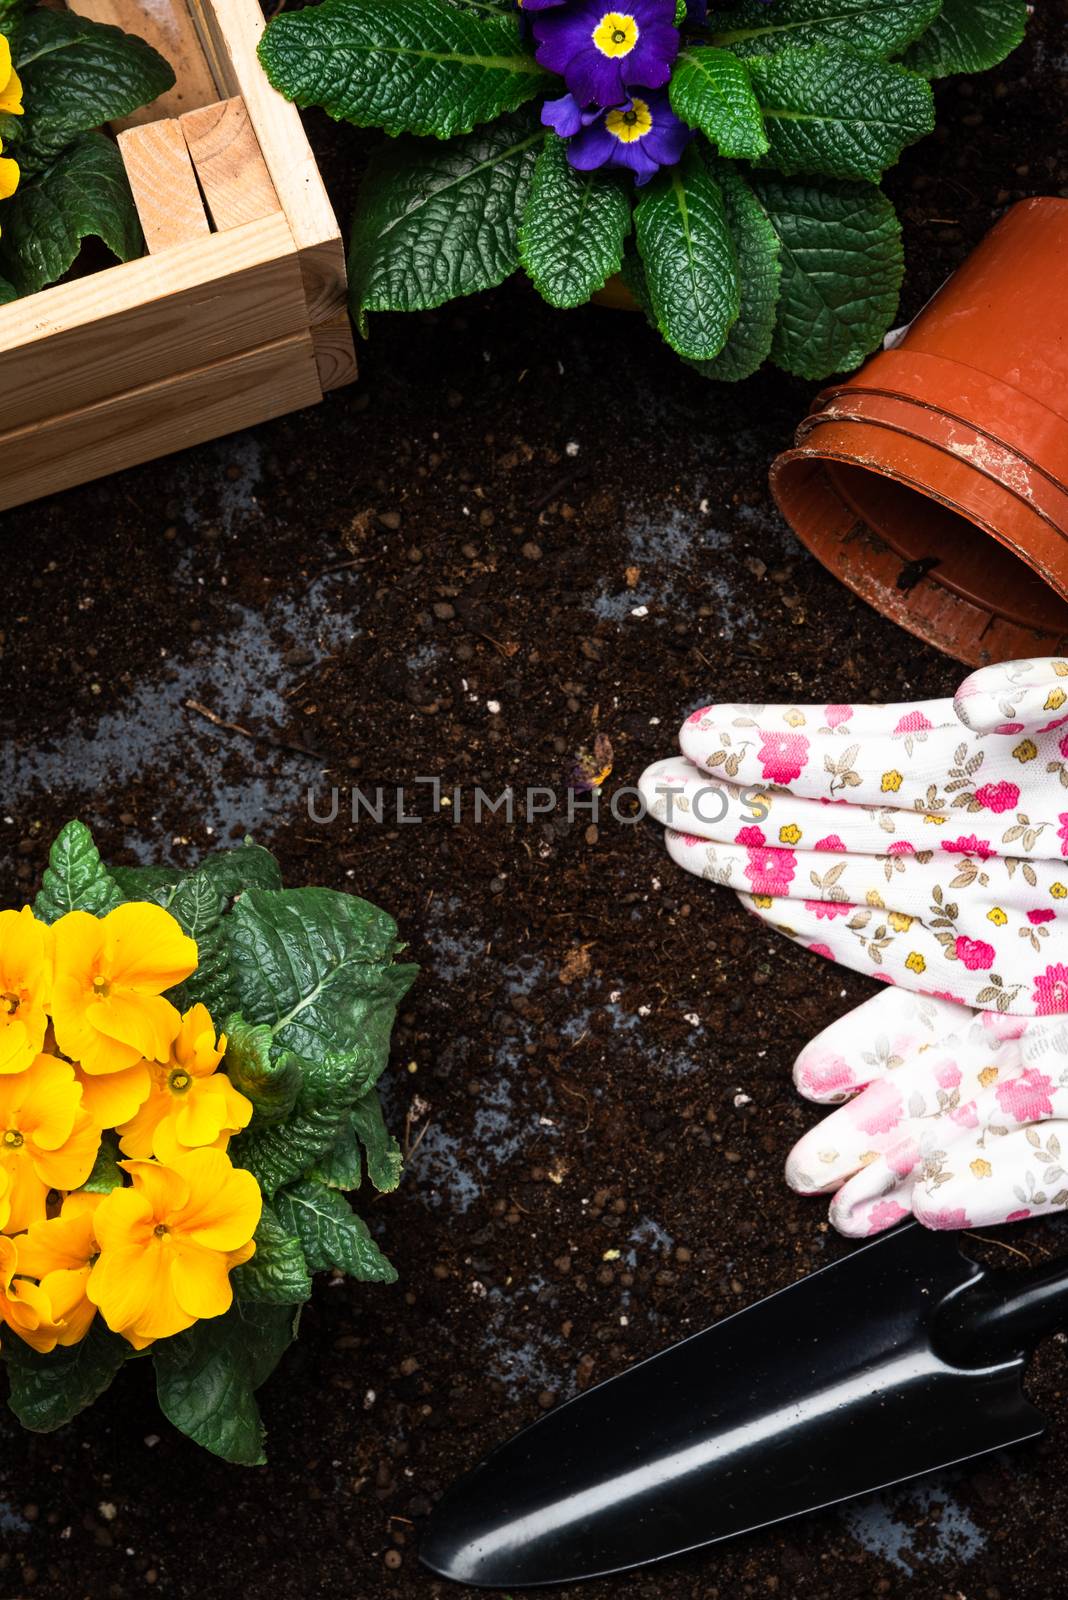 Gardening Hobby and Leisure at Spring Season. Planting Pots and Blooming Flowers. Gardening Tools. Senior Activity Concept.